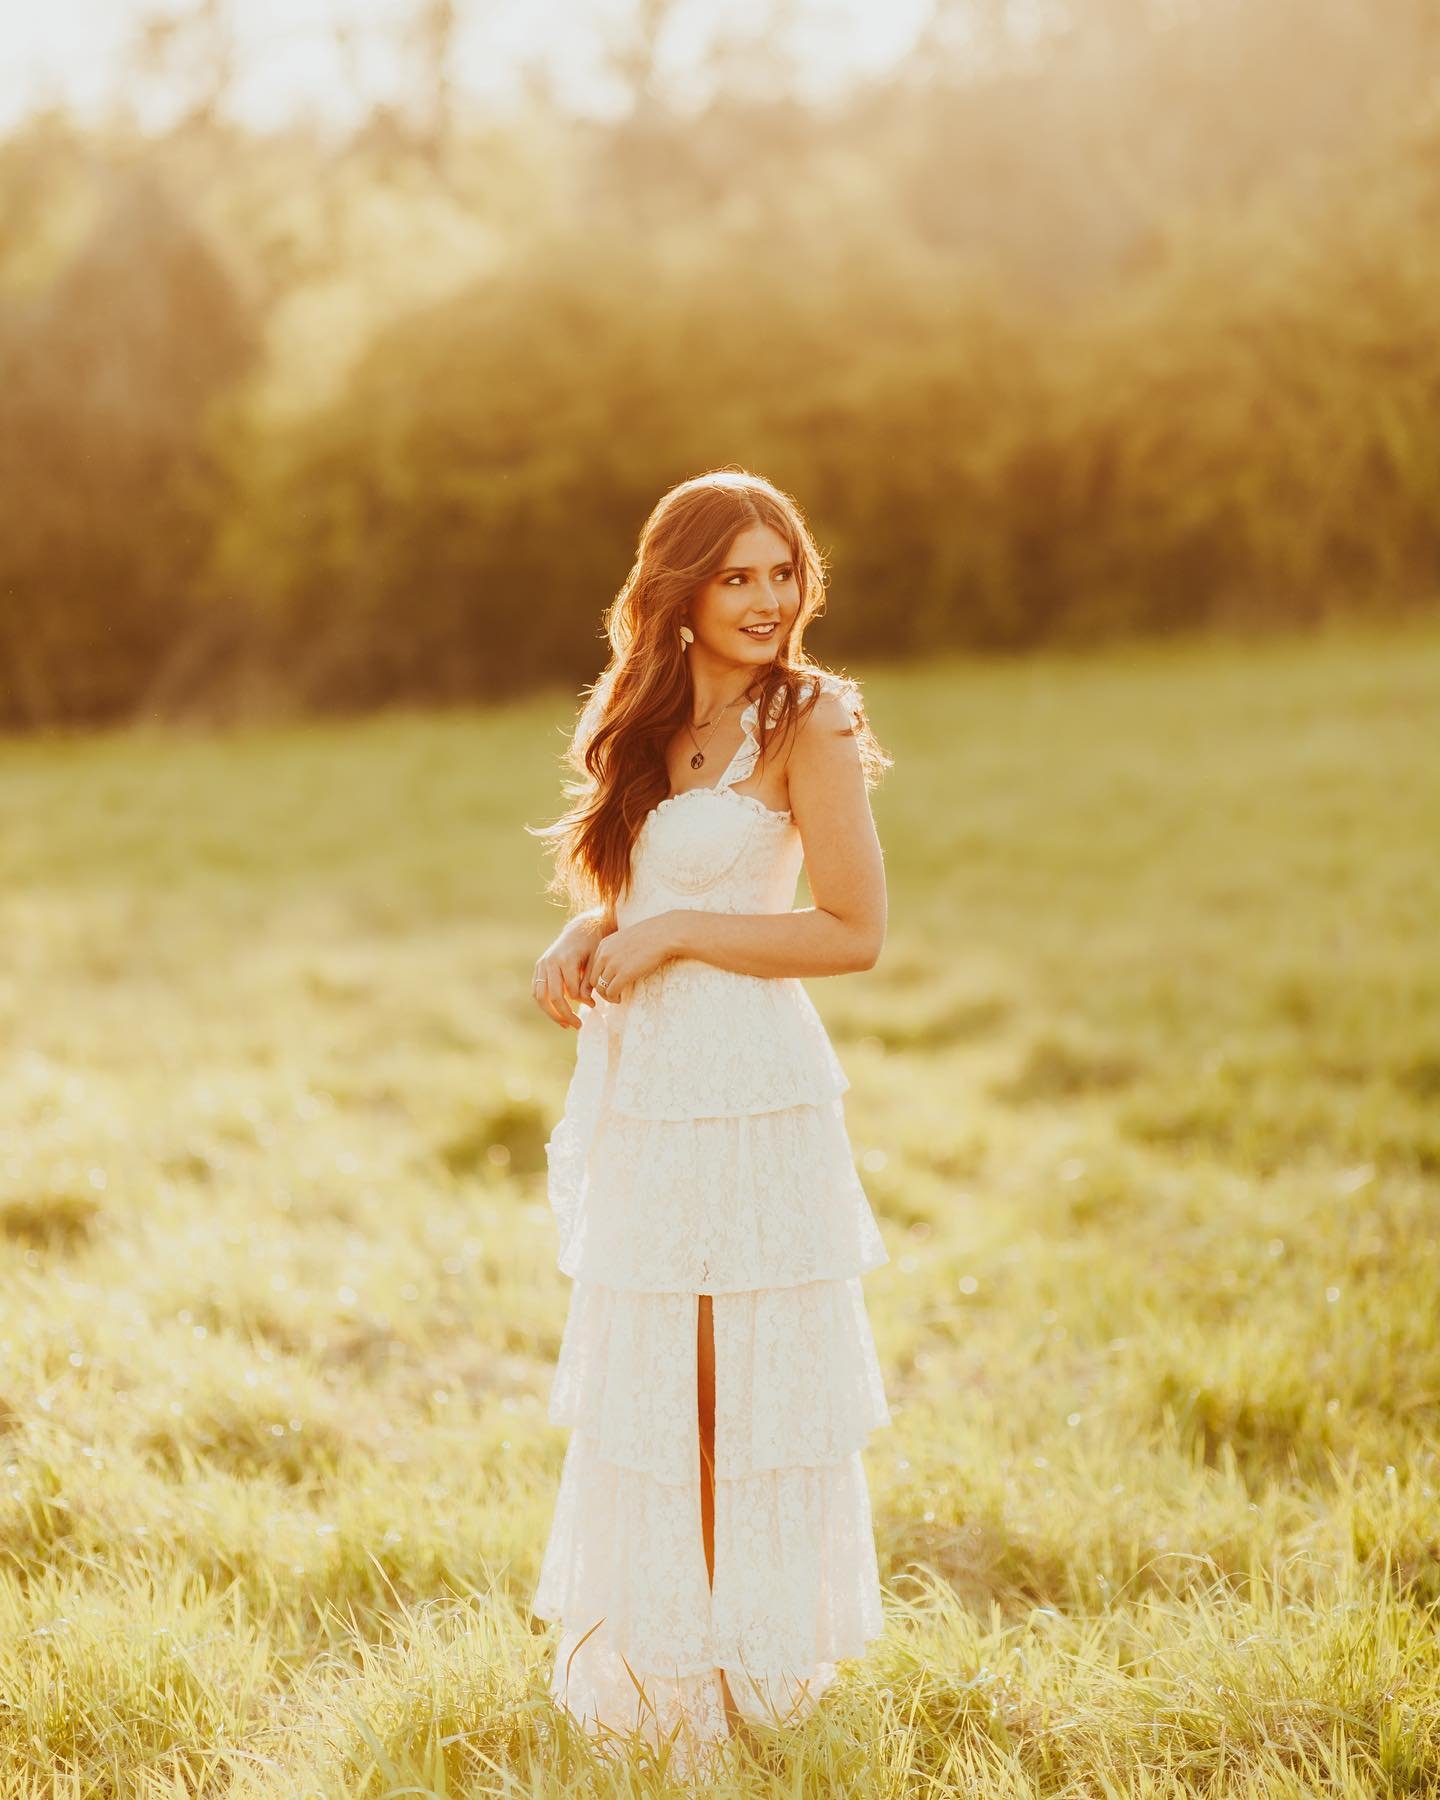 Senior photos with ALIVIA! ☀️🌼🌾✌️✨

A glowy, golden senior photos day with the sweetest!! Alivia&rsquo;s dream senior session was filled with golden hour, laughing, smiles, dancing, barefoot in the water, long dress in a field &mdash; so we did jus